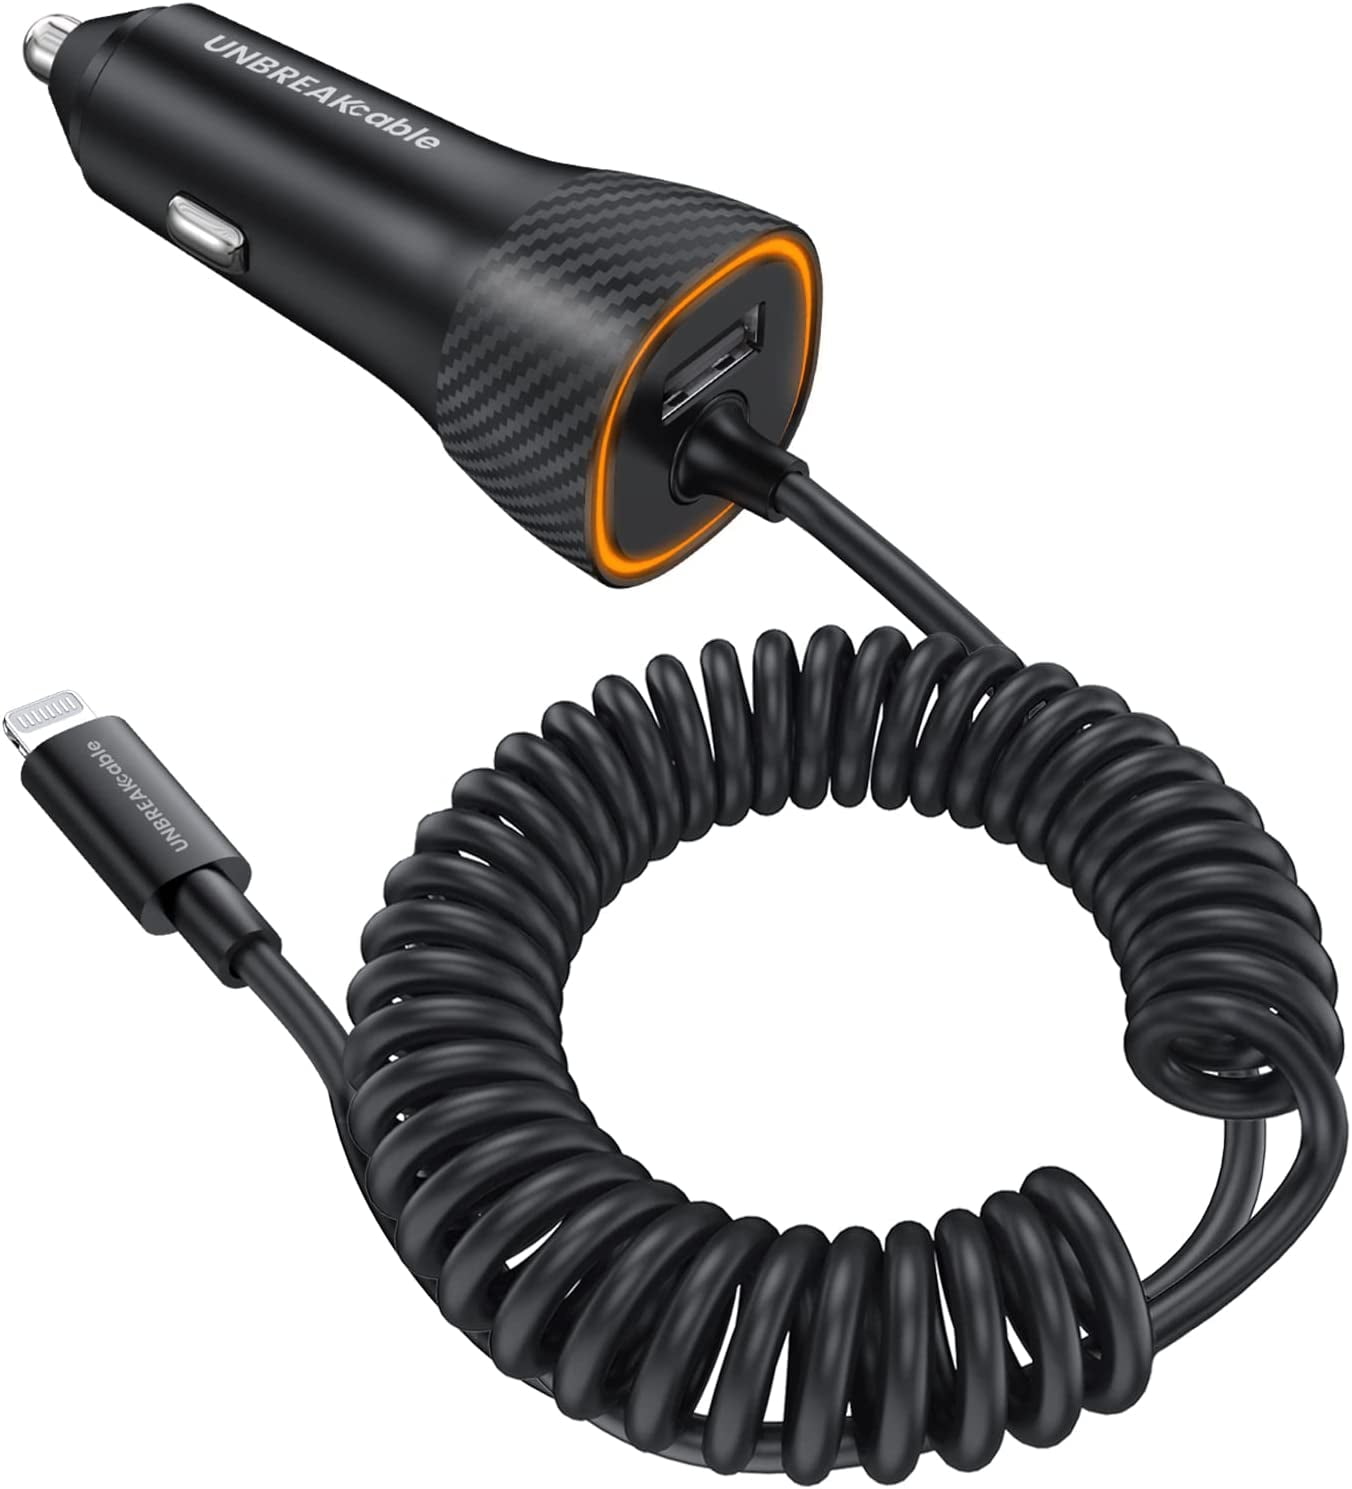 CHARGEUR VOITURE Z44 + CABLE TYPE-C VERS LIGHTNING POUR iPhone